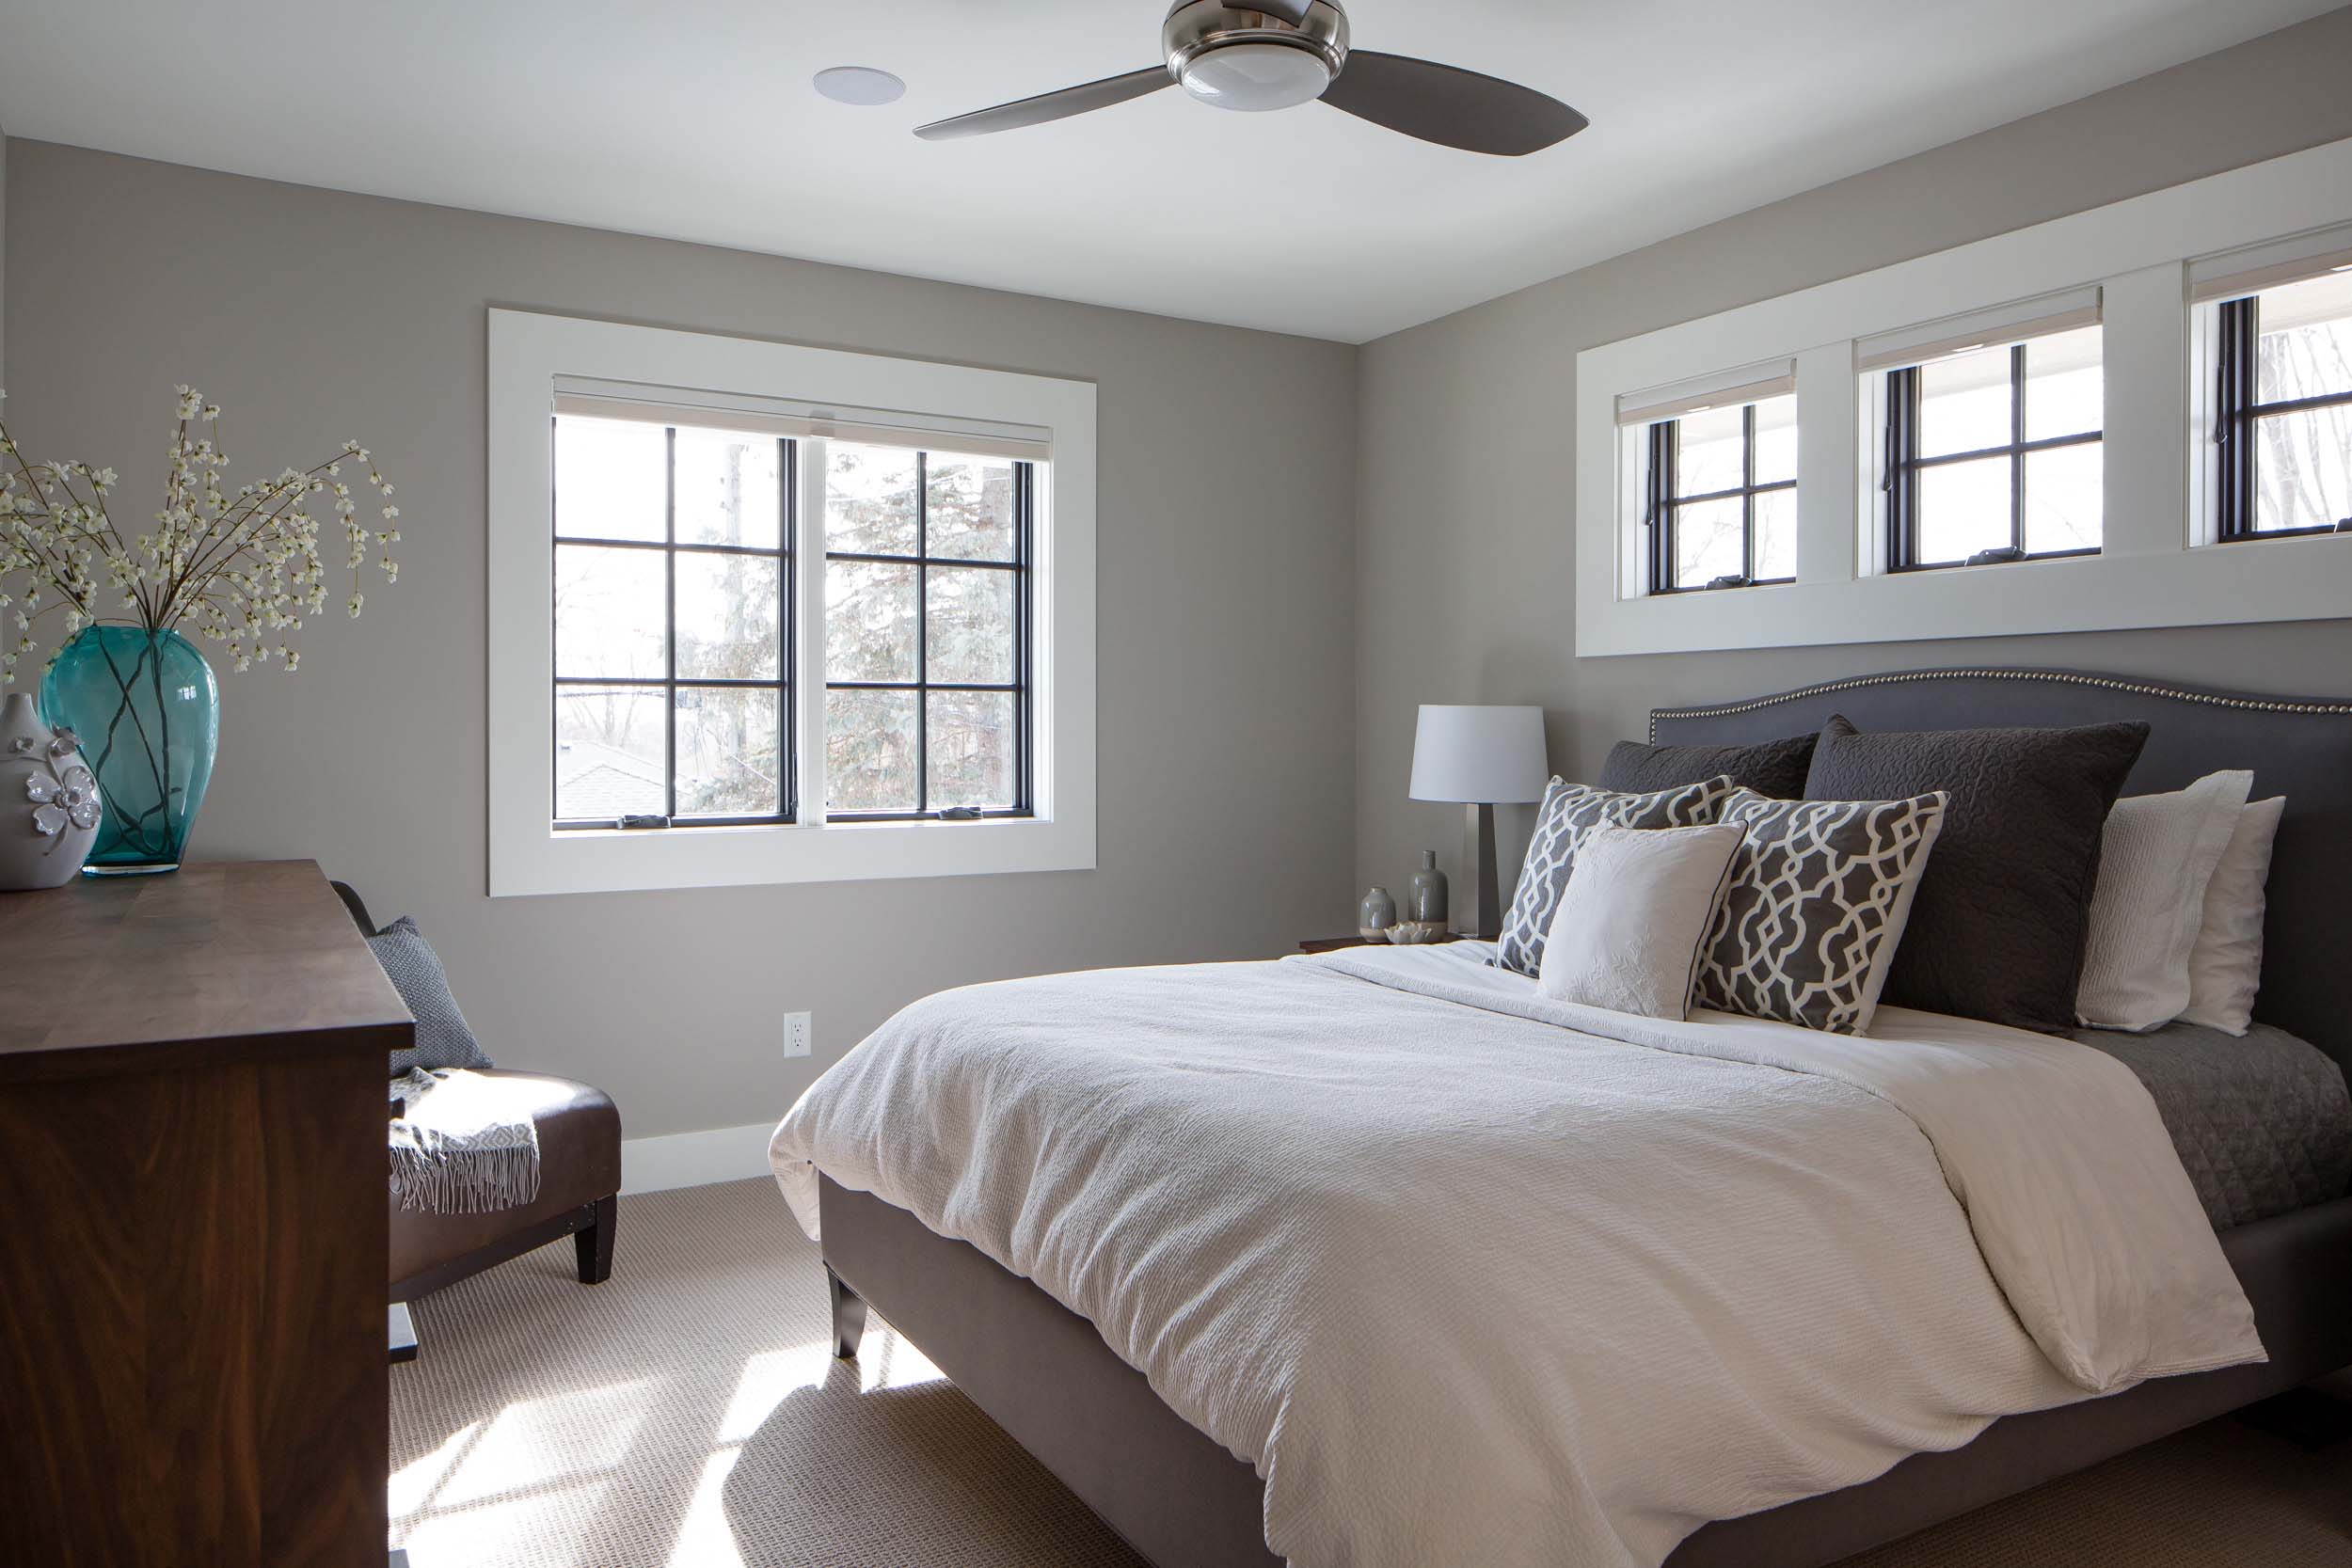 A bed in a bedroom with gray walls and a ceiling fan.